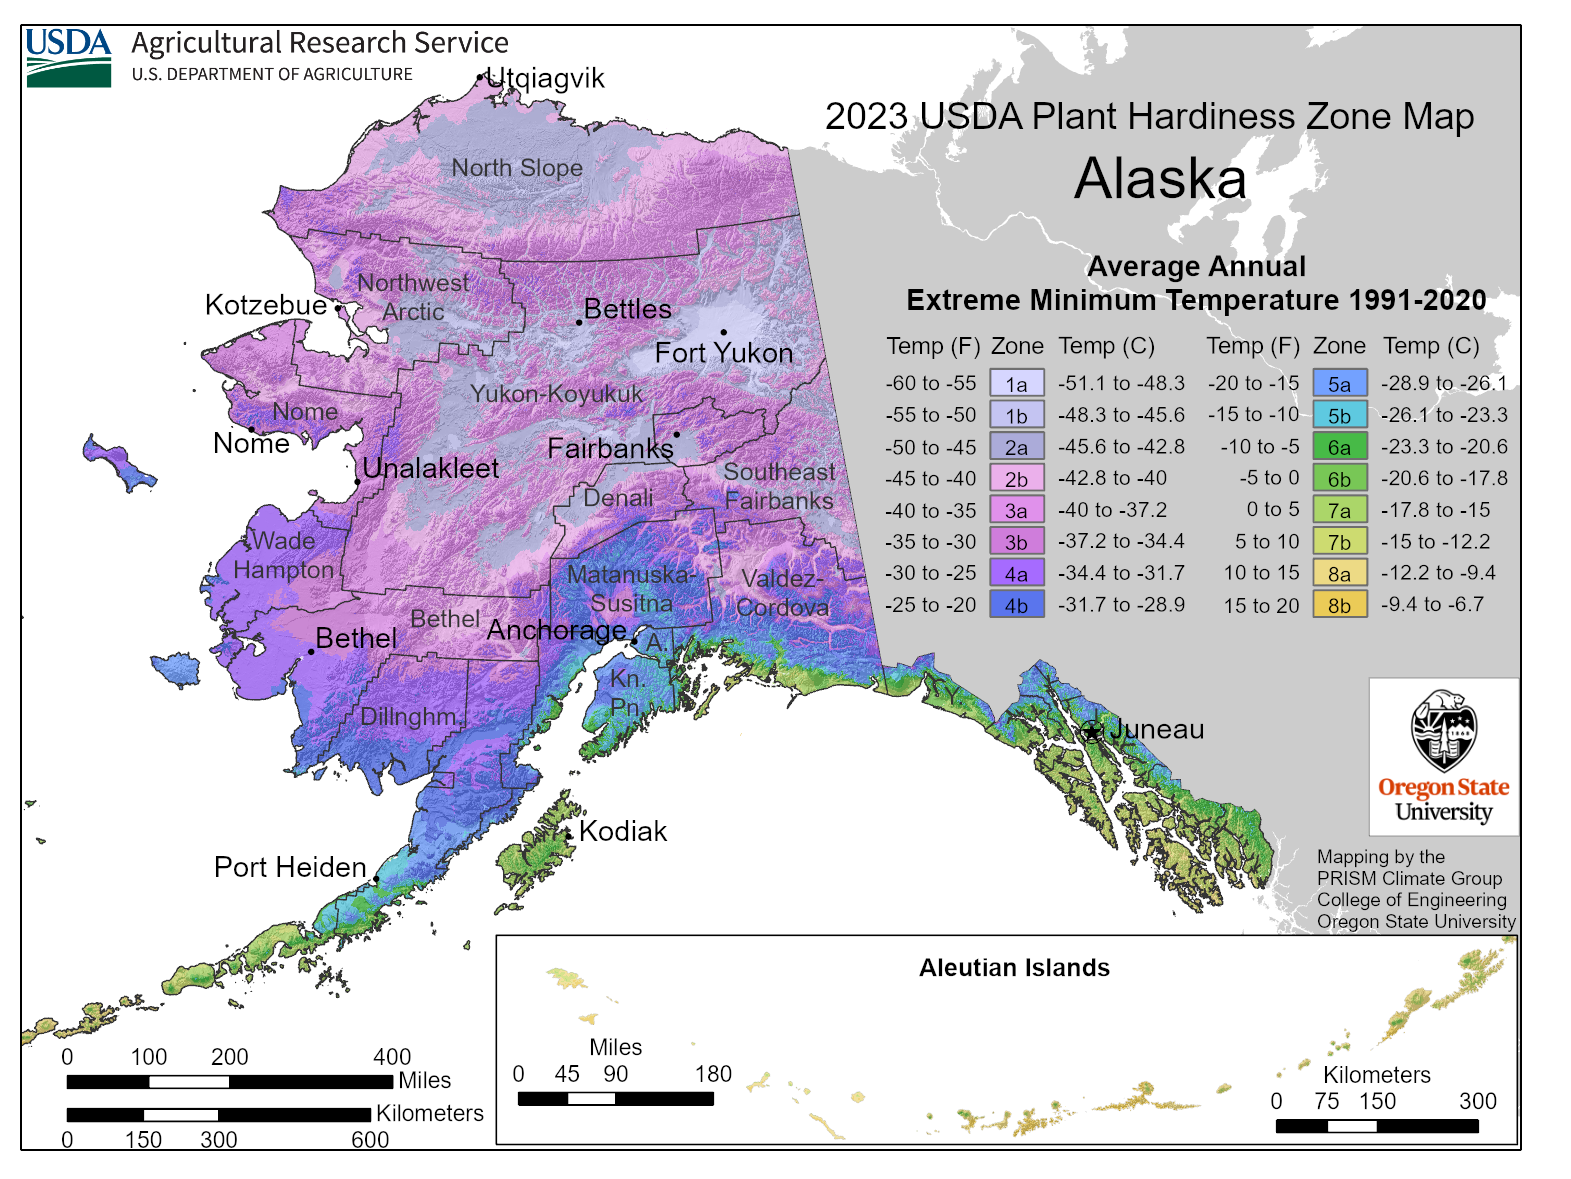 map of Alaska shaded with different colors according to zone hardiness